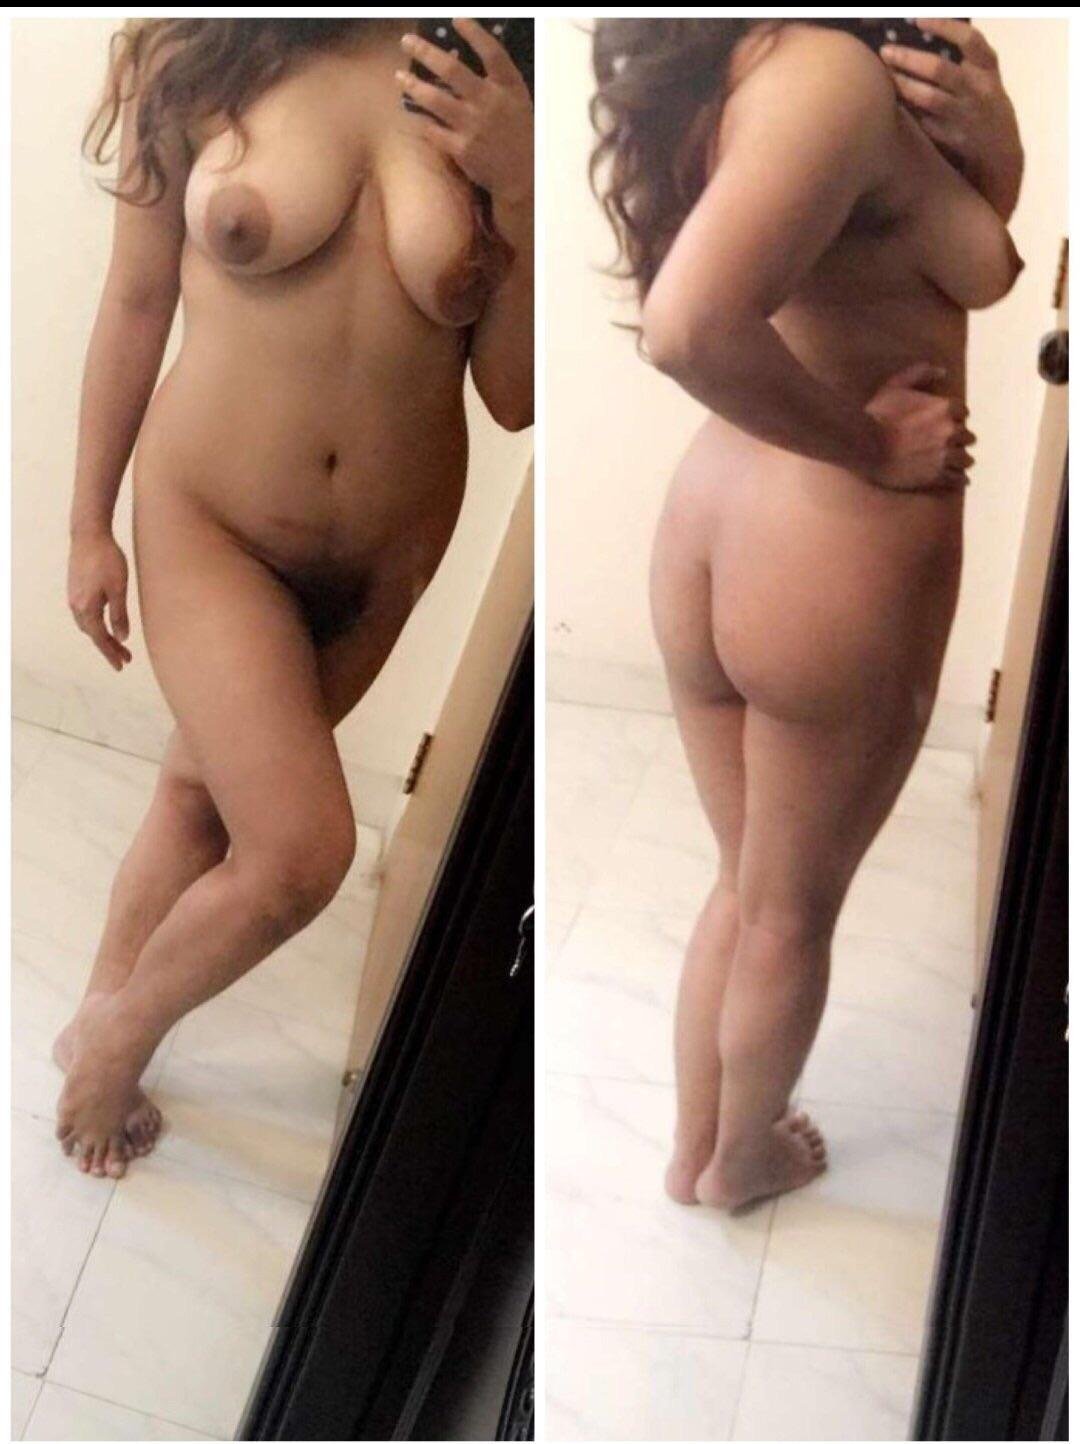 [f]irst post here. South asian muslim so repression is strong in this one...